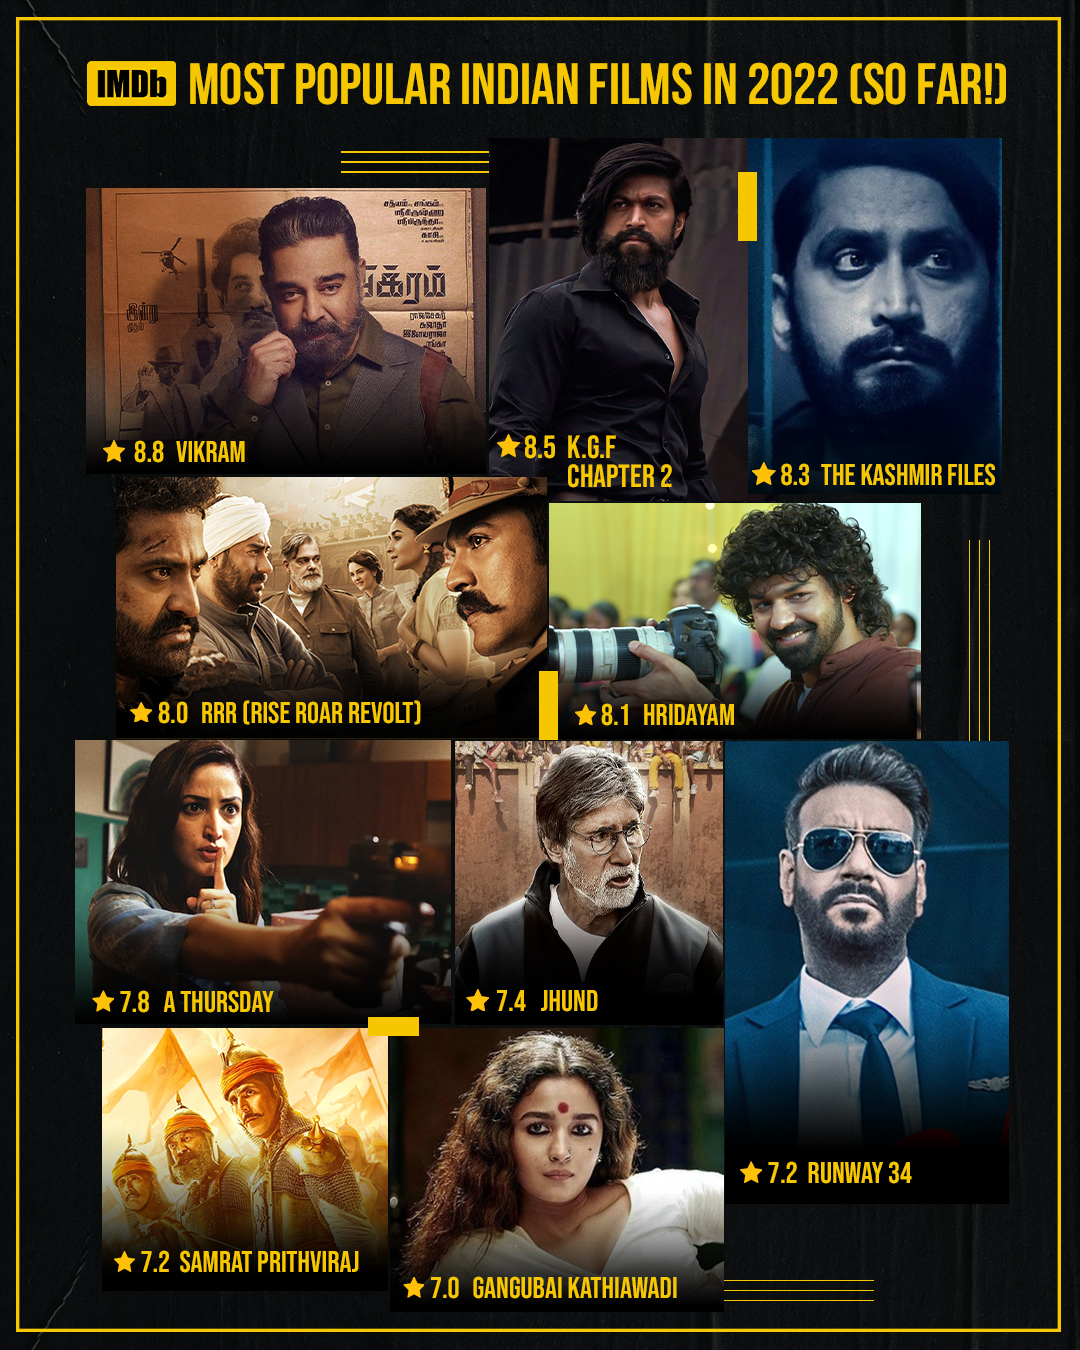 IMDb top 10 films and web series of 2022: The Kashmir Files and Campus Diaries grab top spot respectively